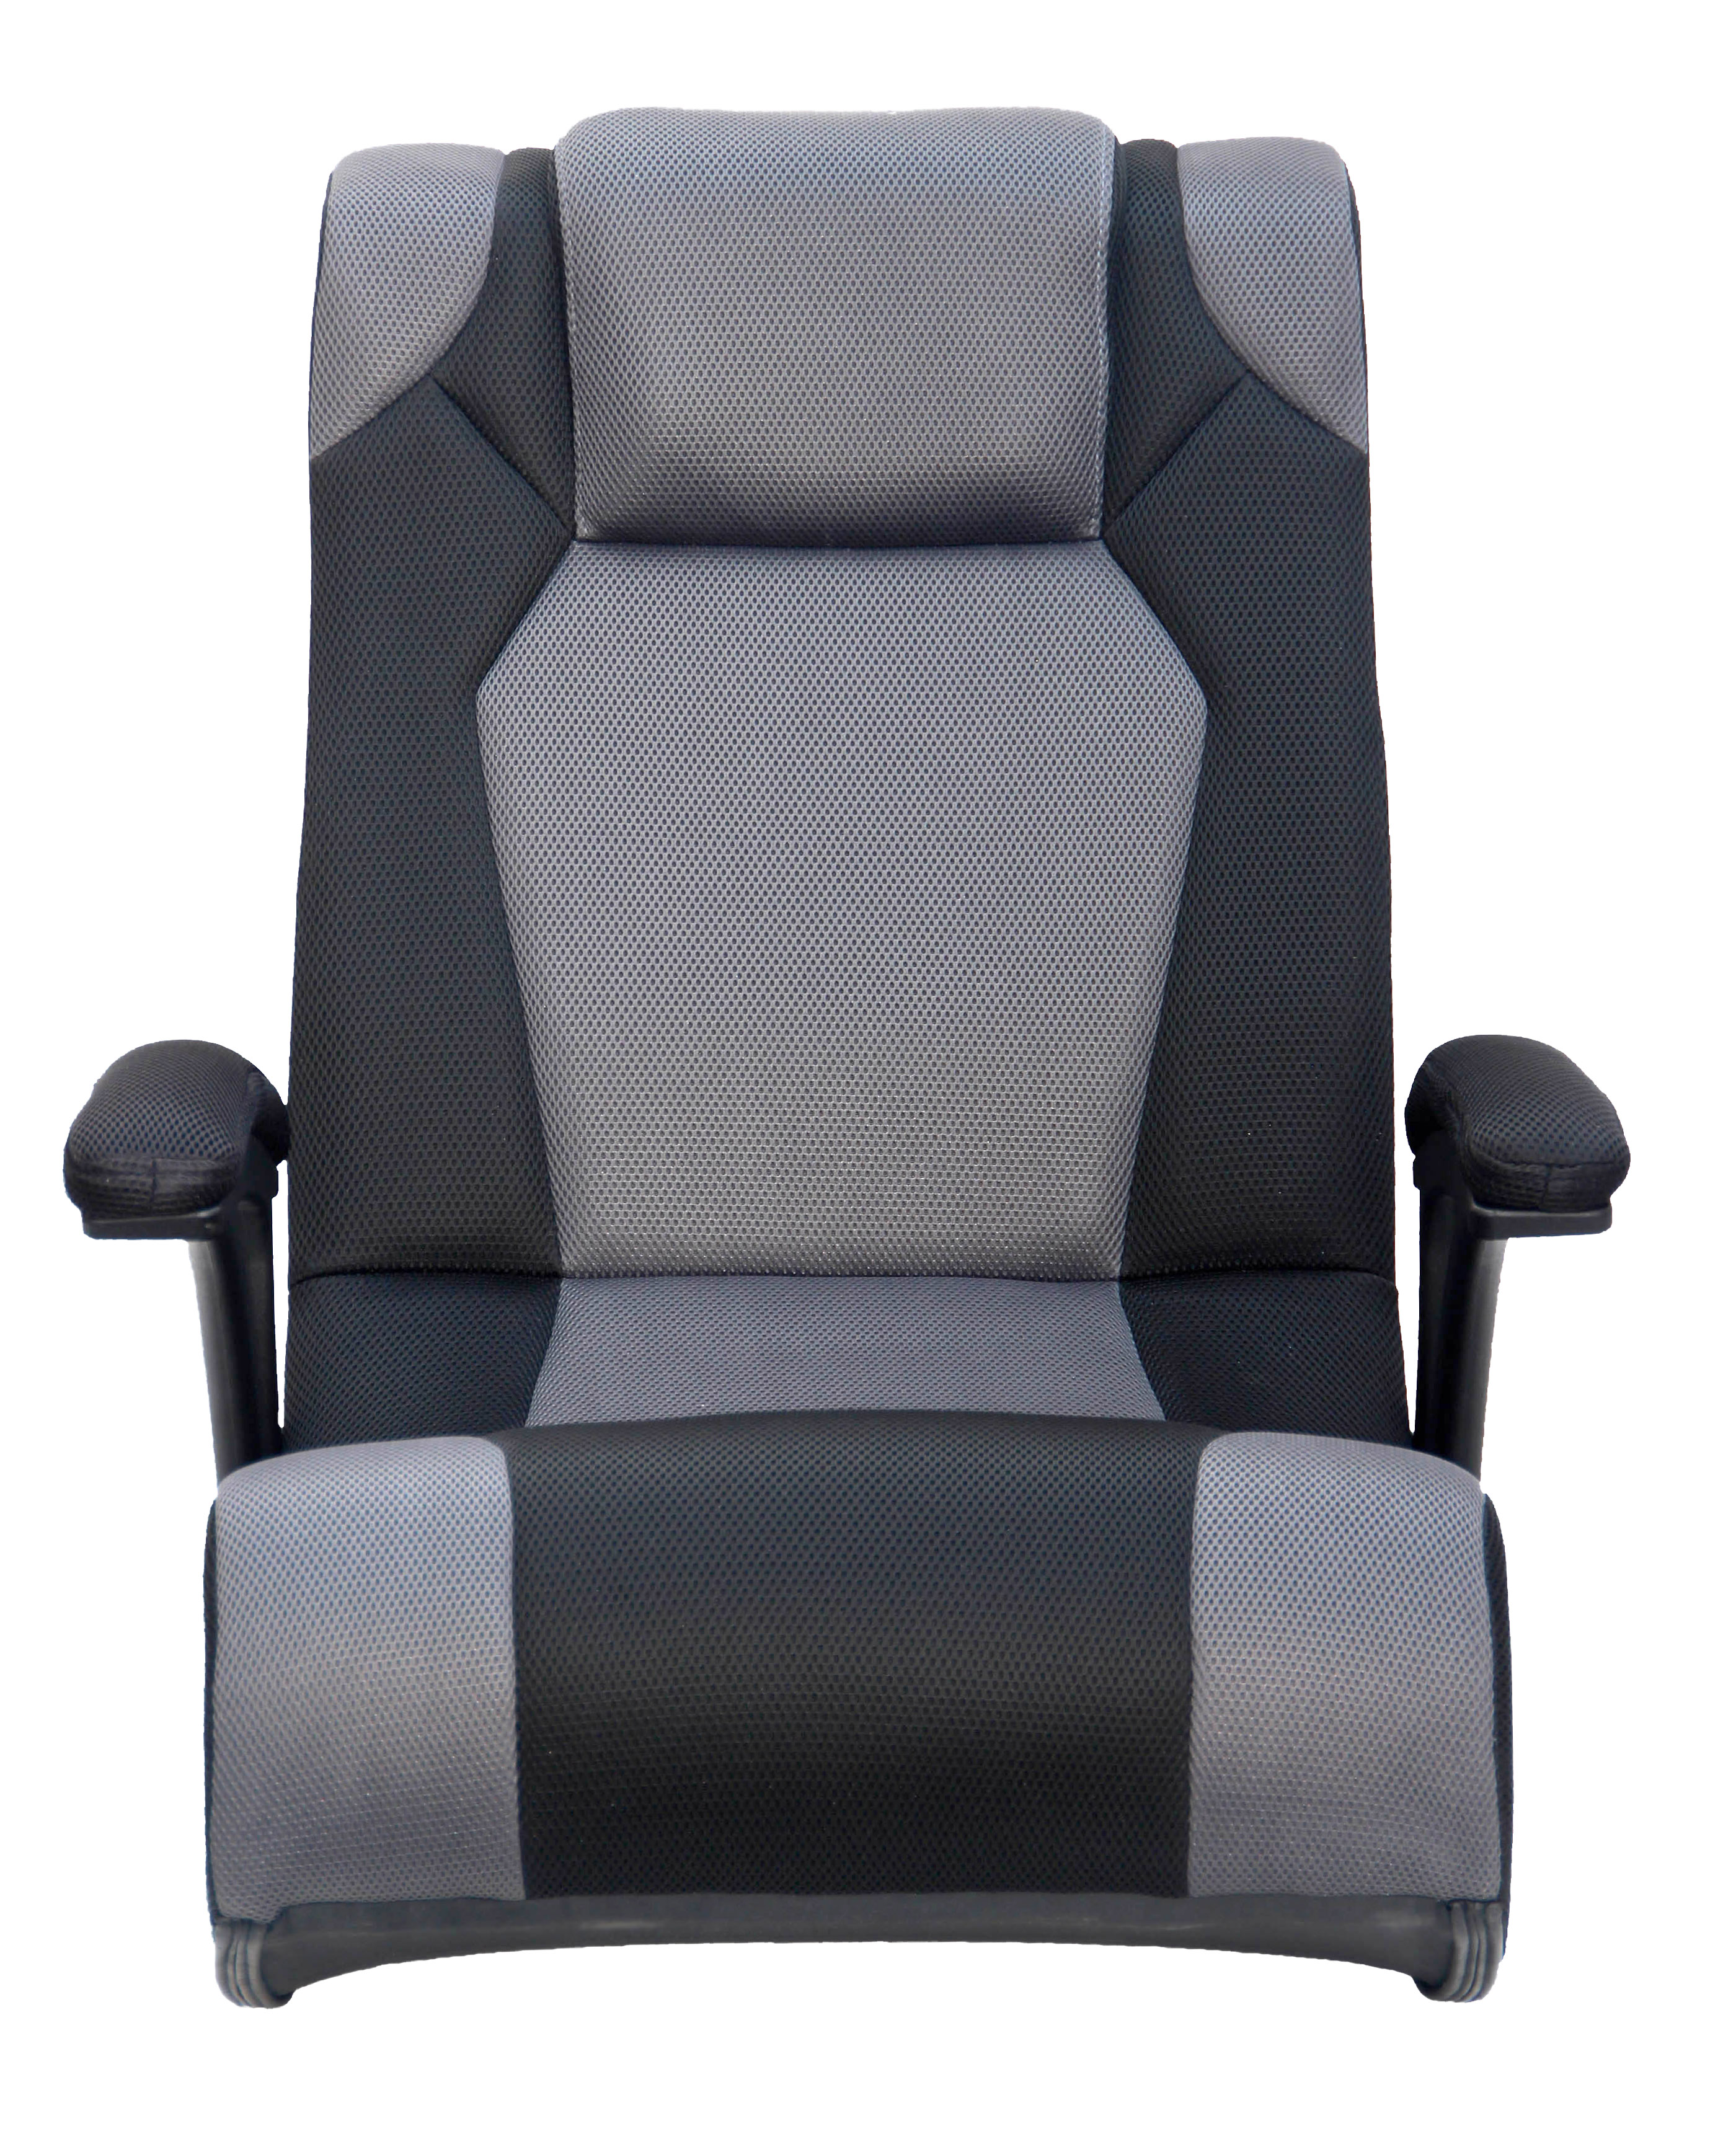 X Rocker Pro 200 Gaming Chair Rocker with Sound Enhancement Features - image 5 of 7